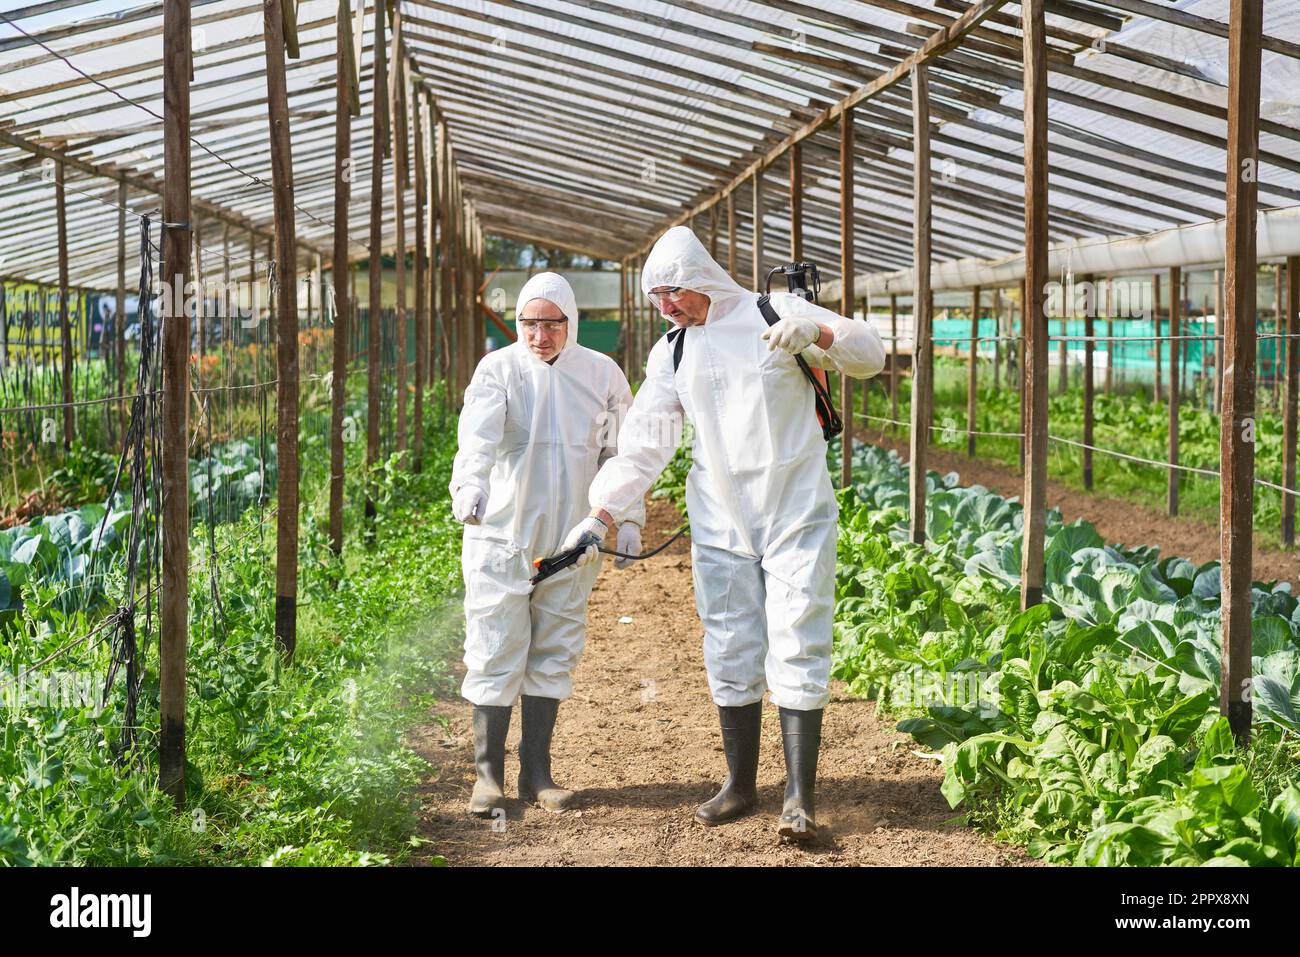 Male farmer assisting coworker spraying pesticide through sprayer while standing in greenhouse Stock Photo